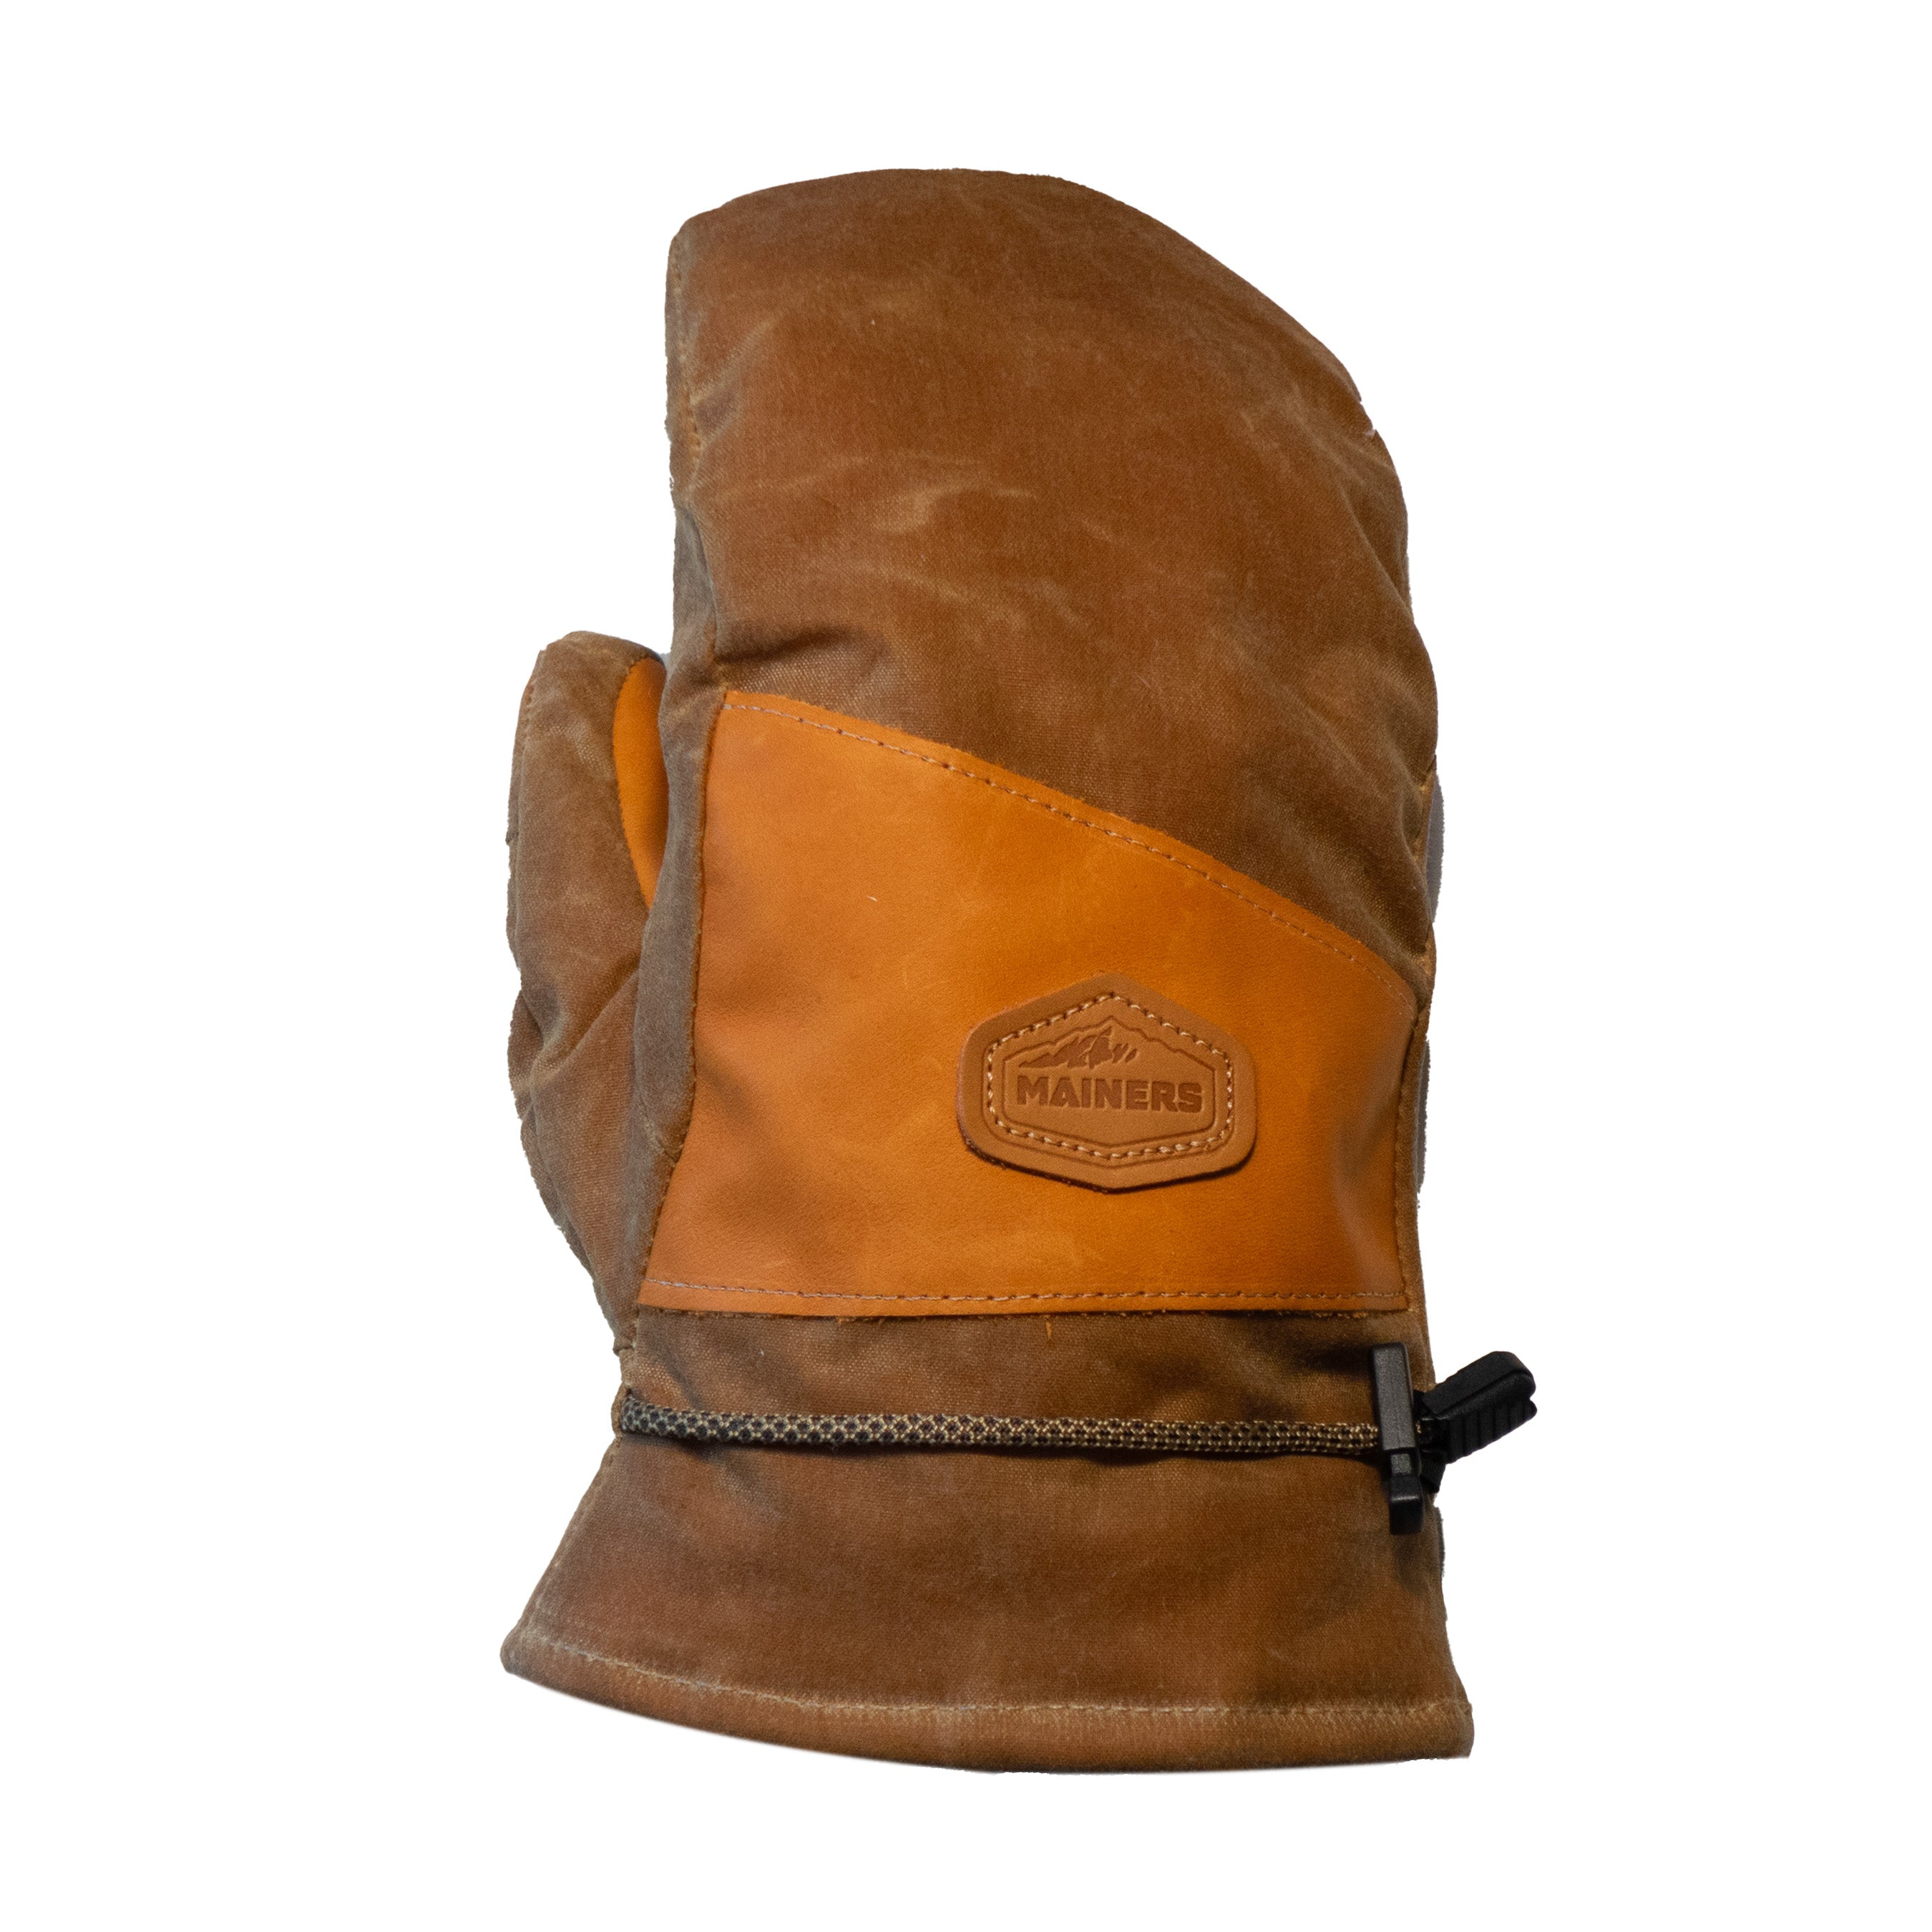 A brown and orange mitten with a zipper.